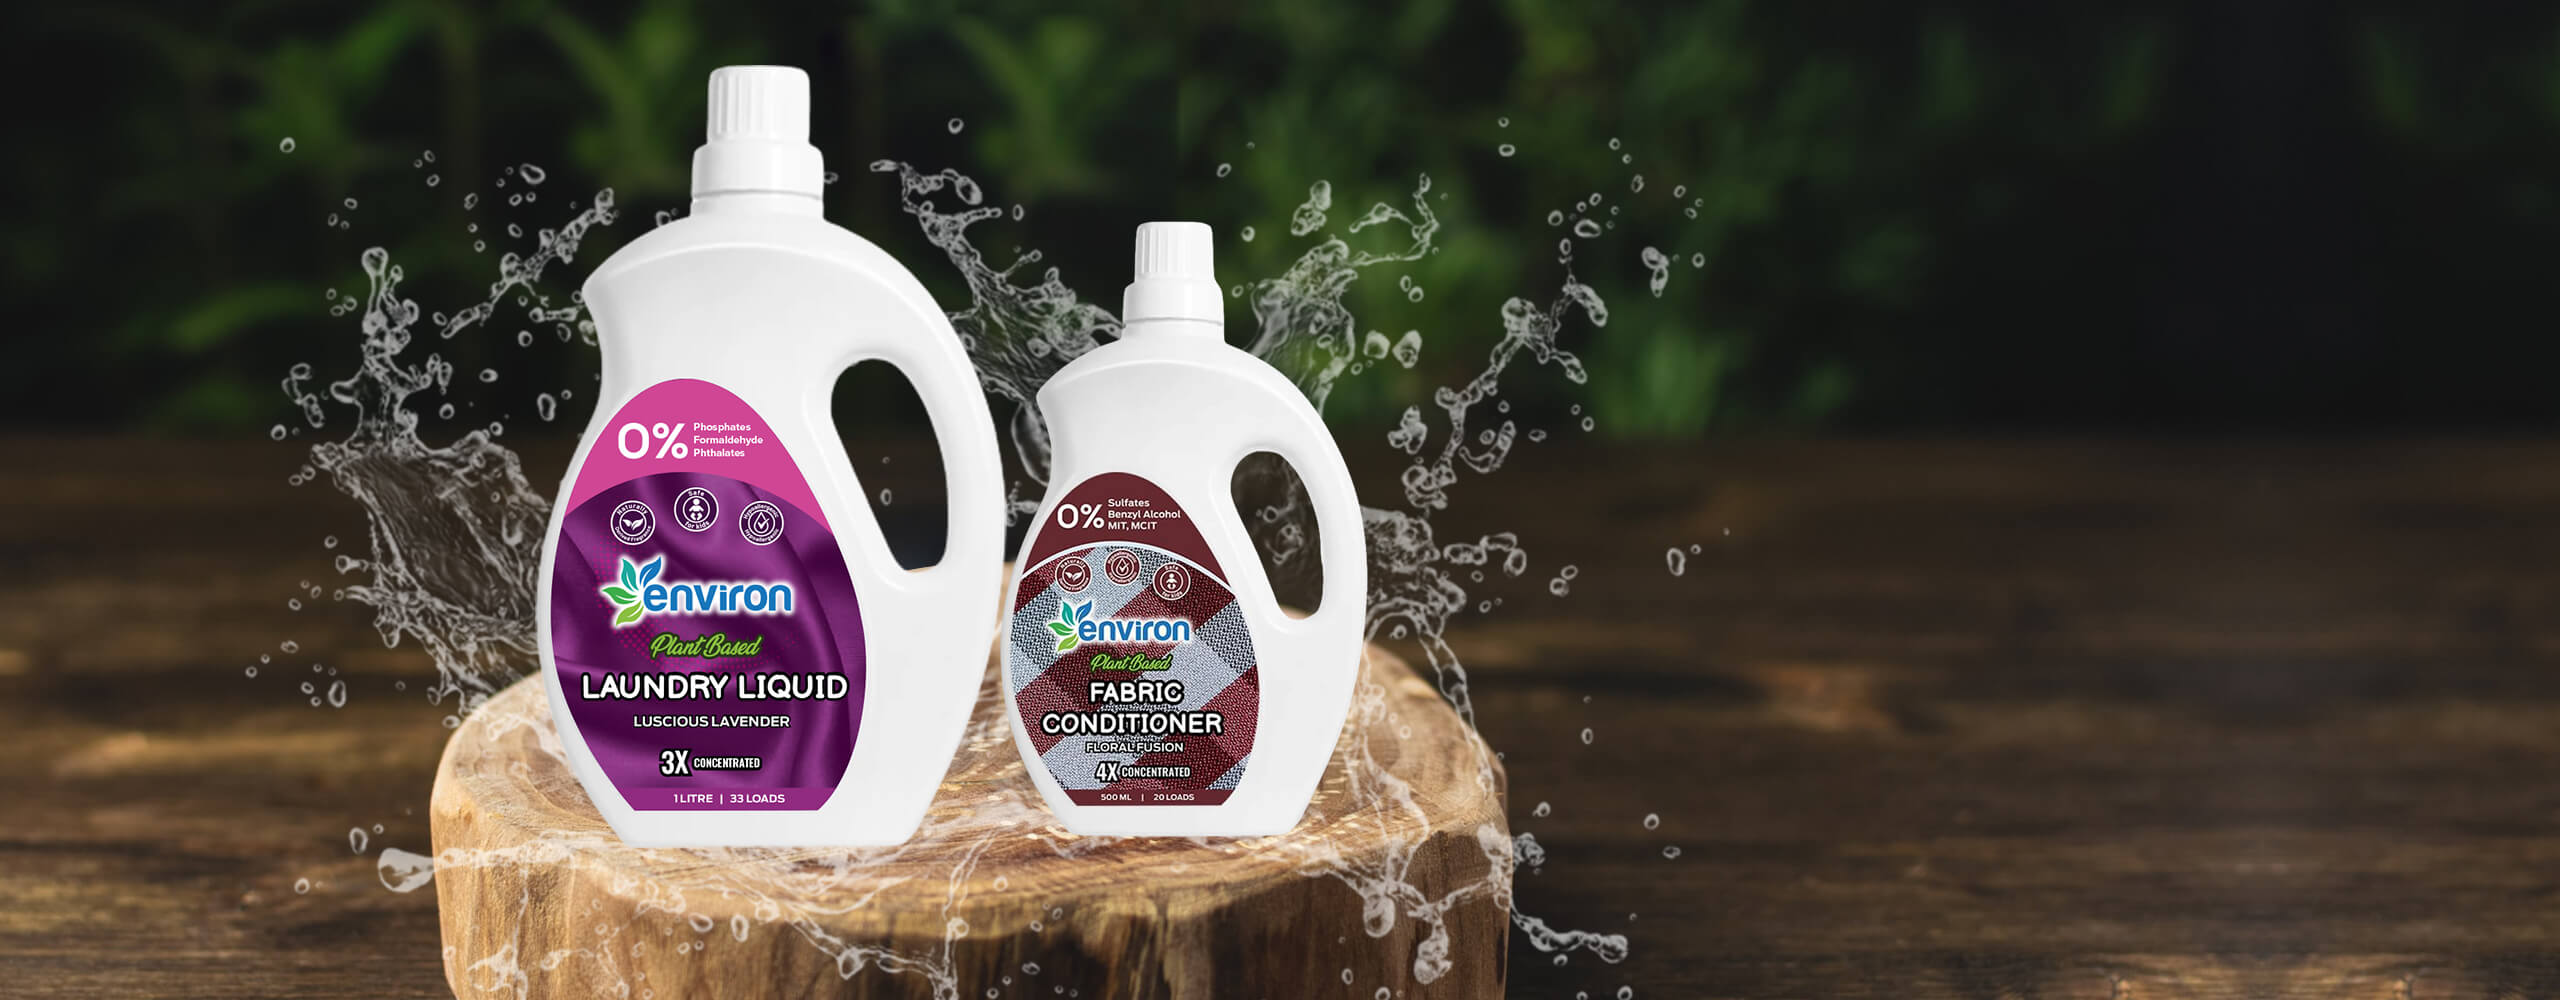 Laundry liquid and fabric conditioner/ softener on a tree stump showing the natural formulation of the product